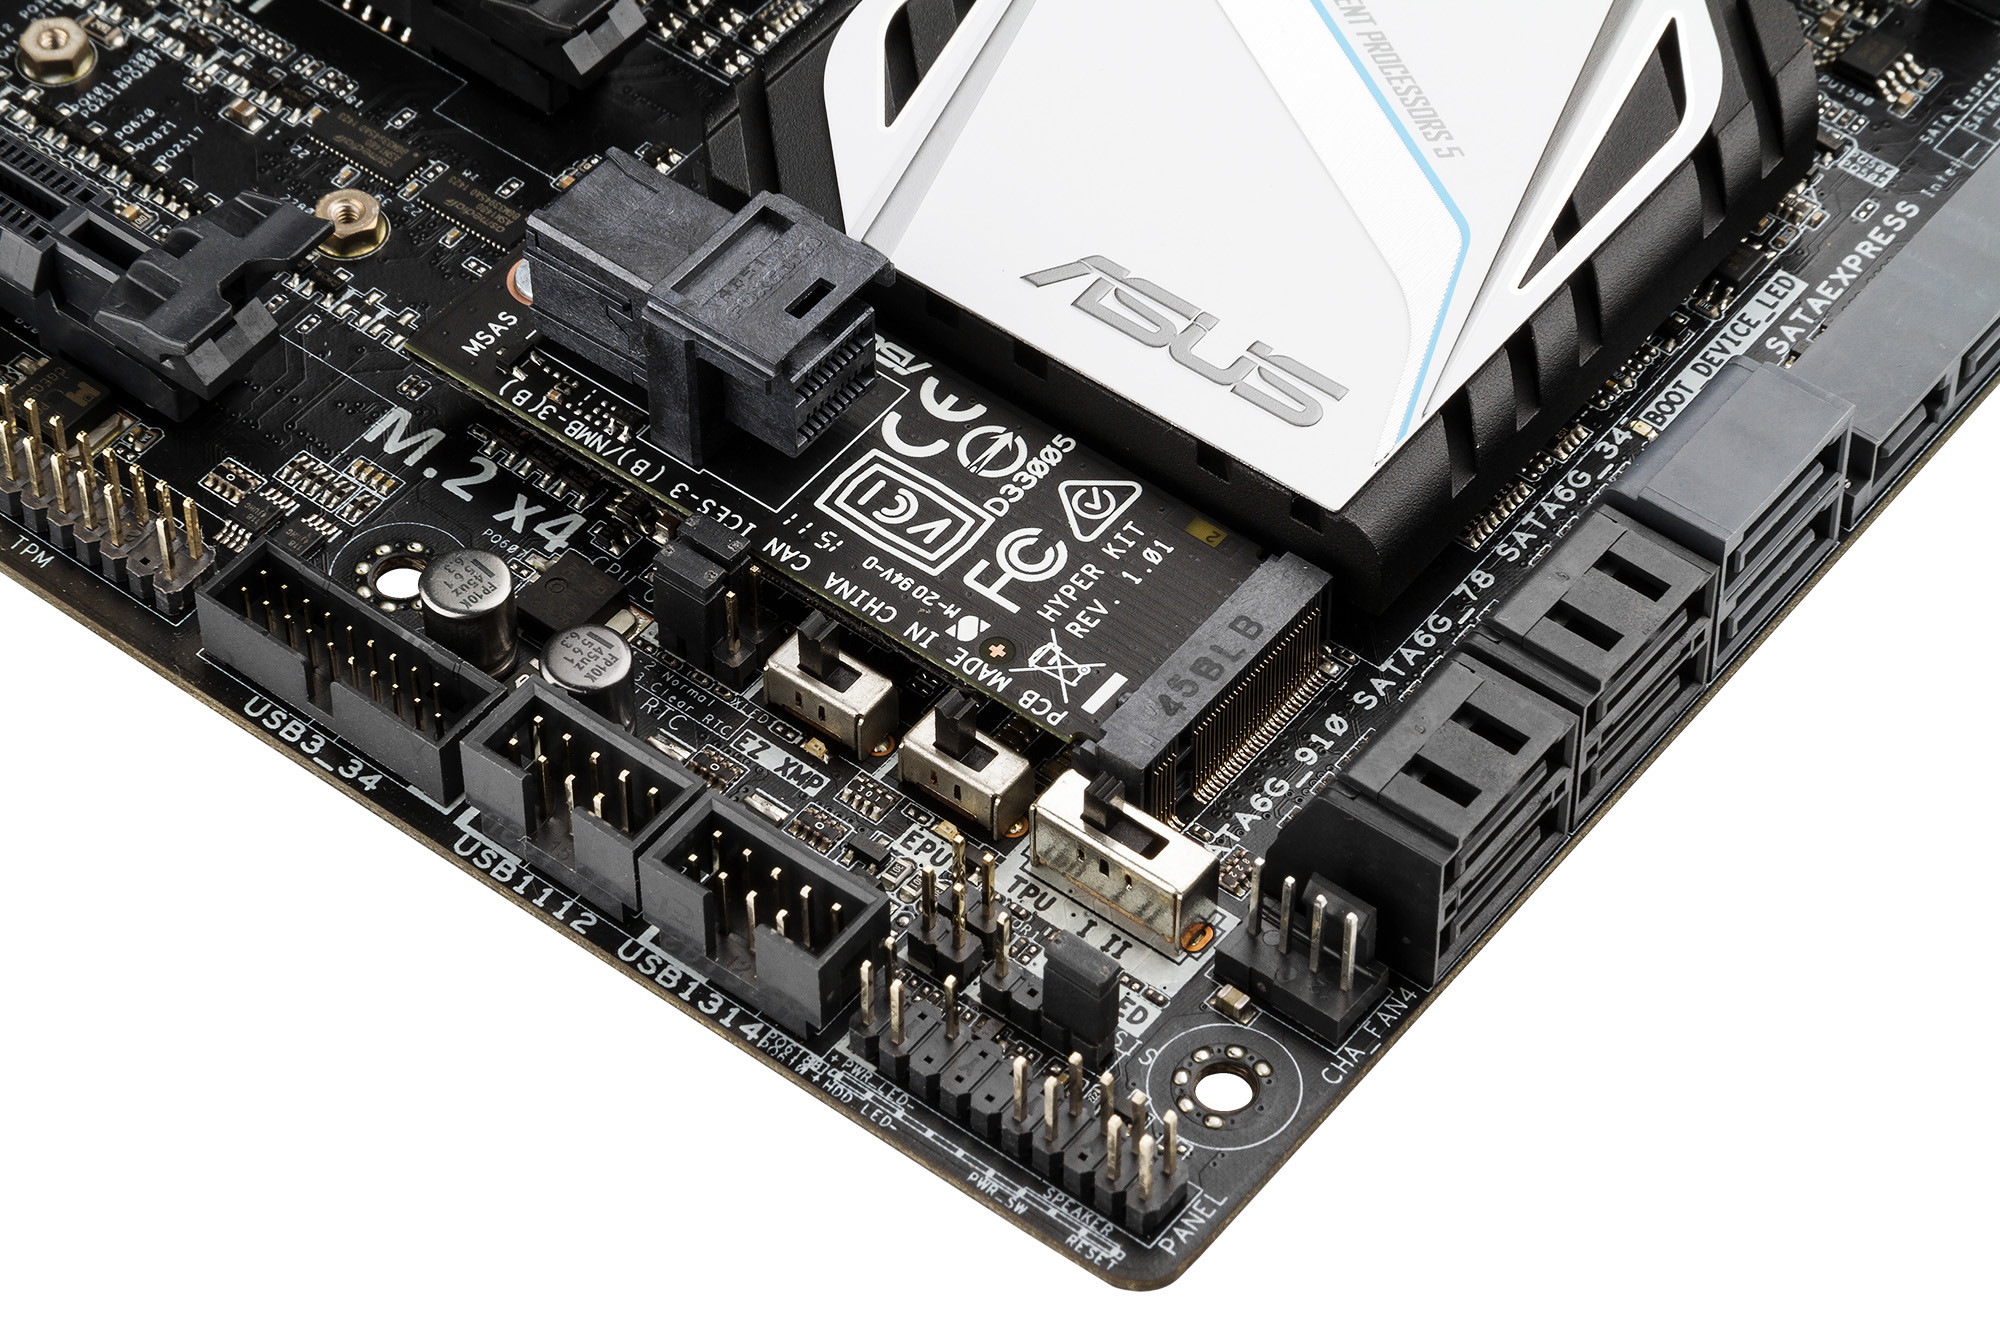 ASUS Announces that All its Z97 and X99 Motherboards Support NVMe 